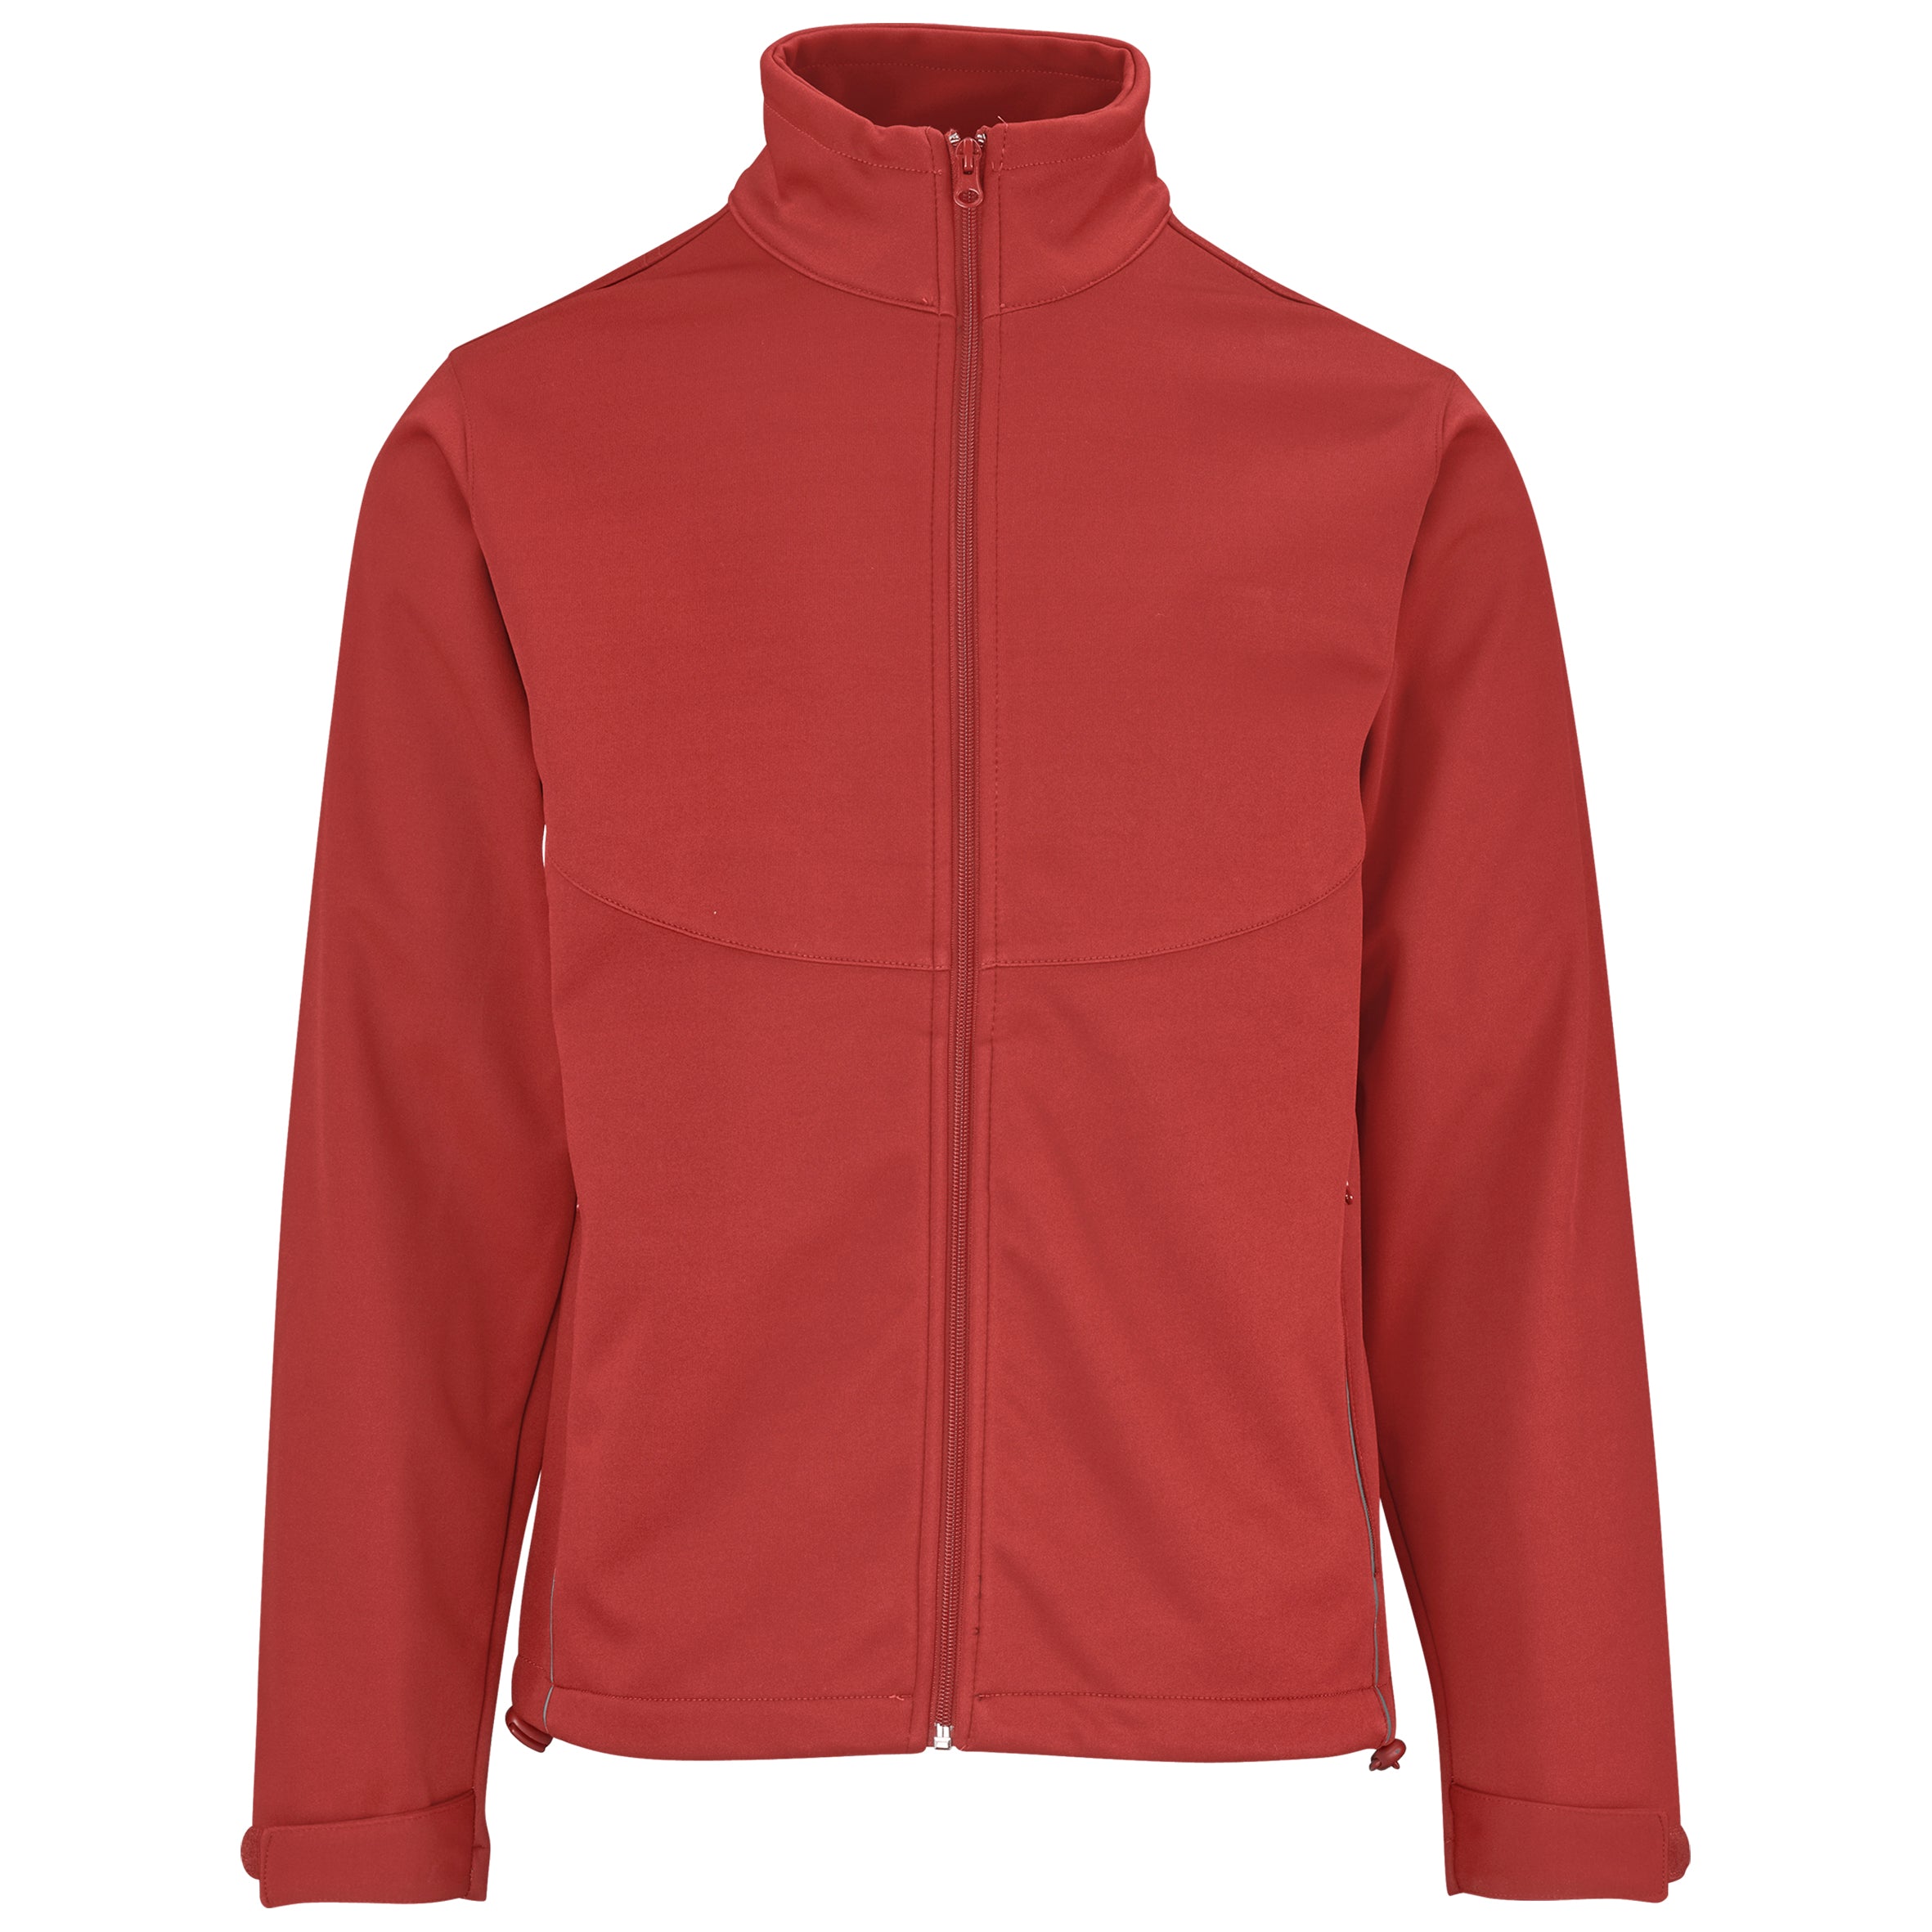 Mens Cromwell Softshell Jacket - Red